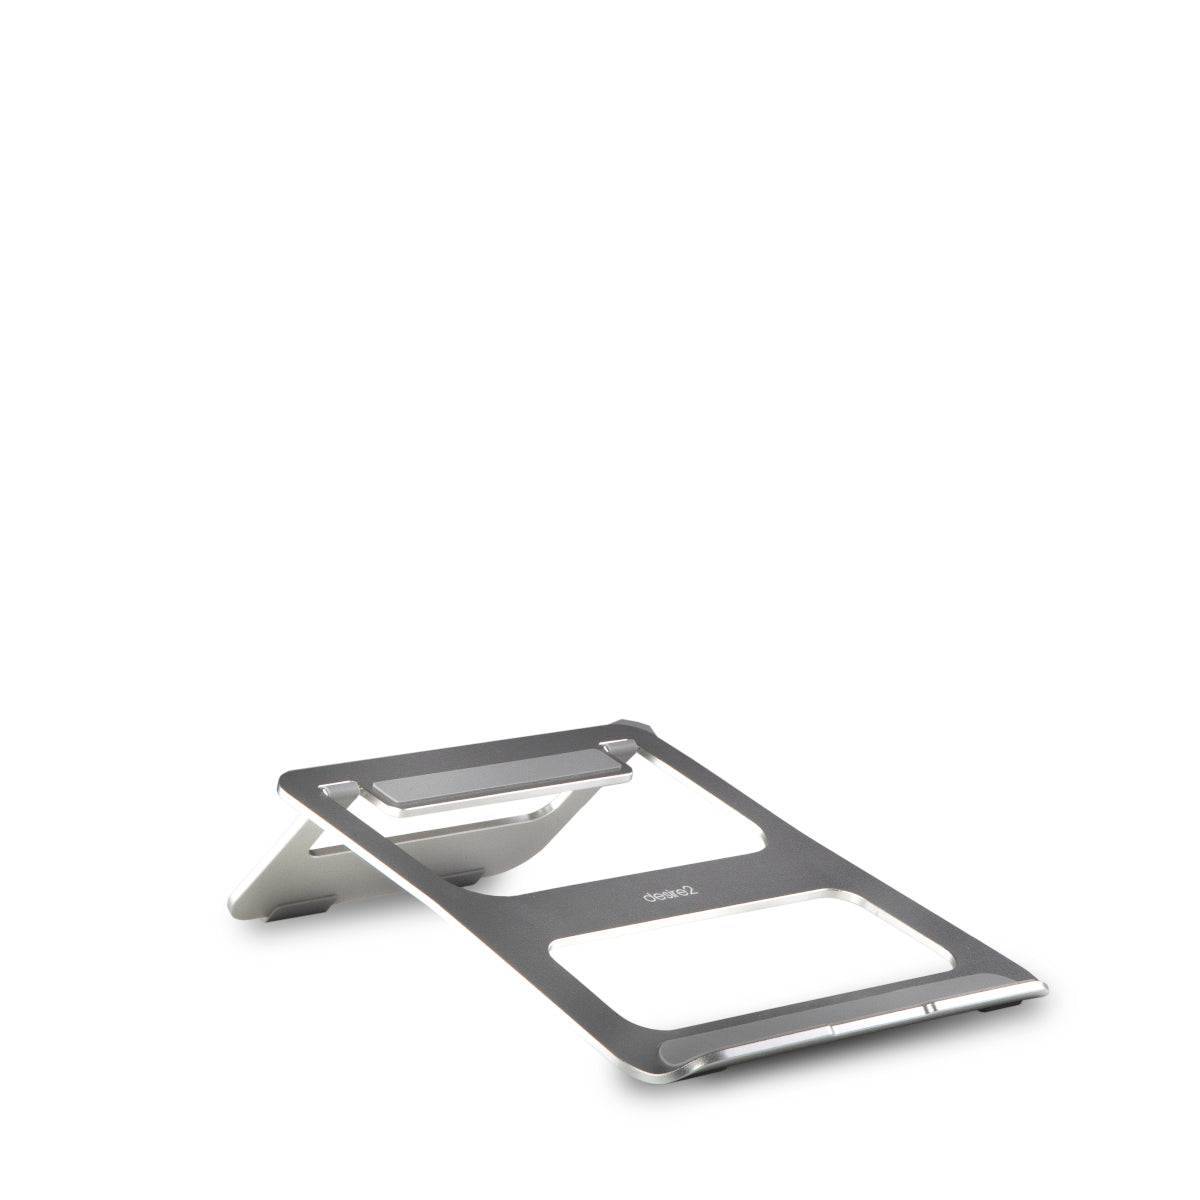 A very strong looking laptop stand made from silver aluminium.  High grade silicone can be seen on all contact points. 